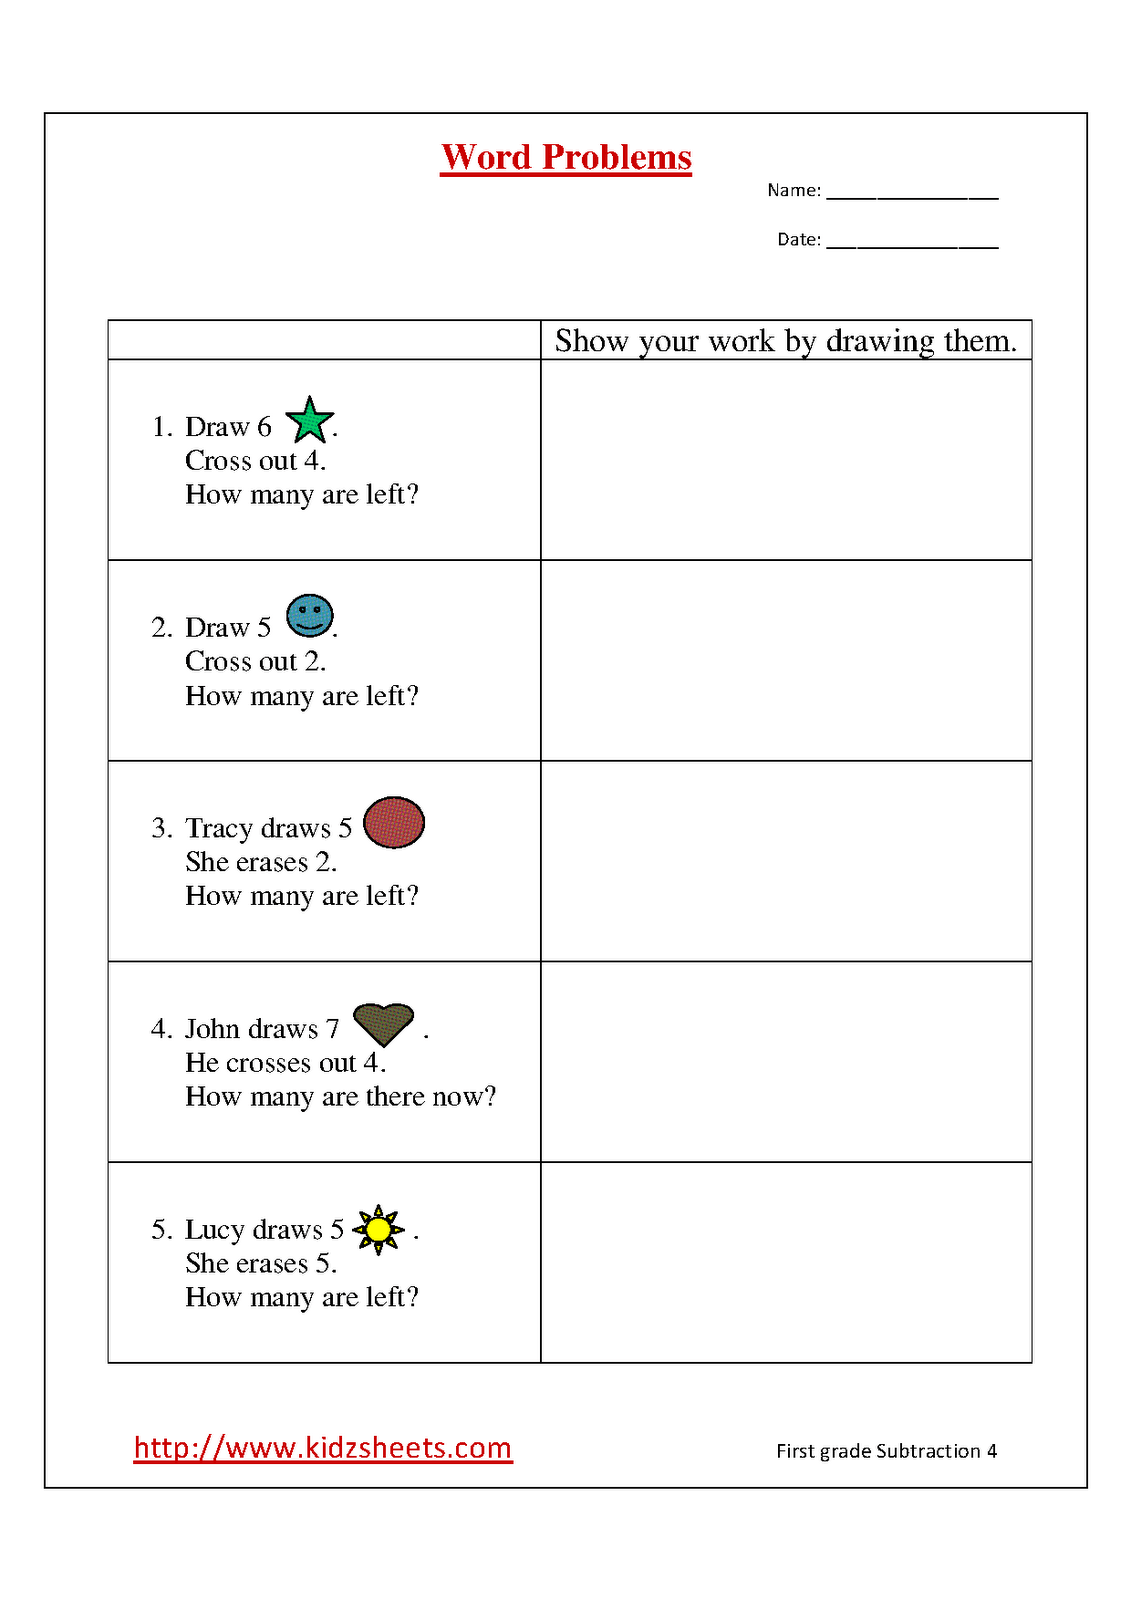 Best Images Of 1st Grade Subtraction Word Problems